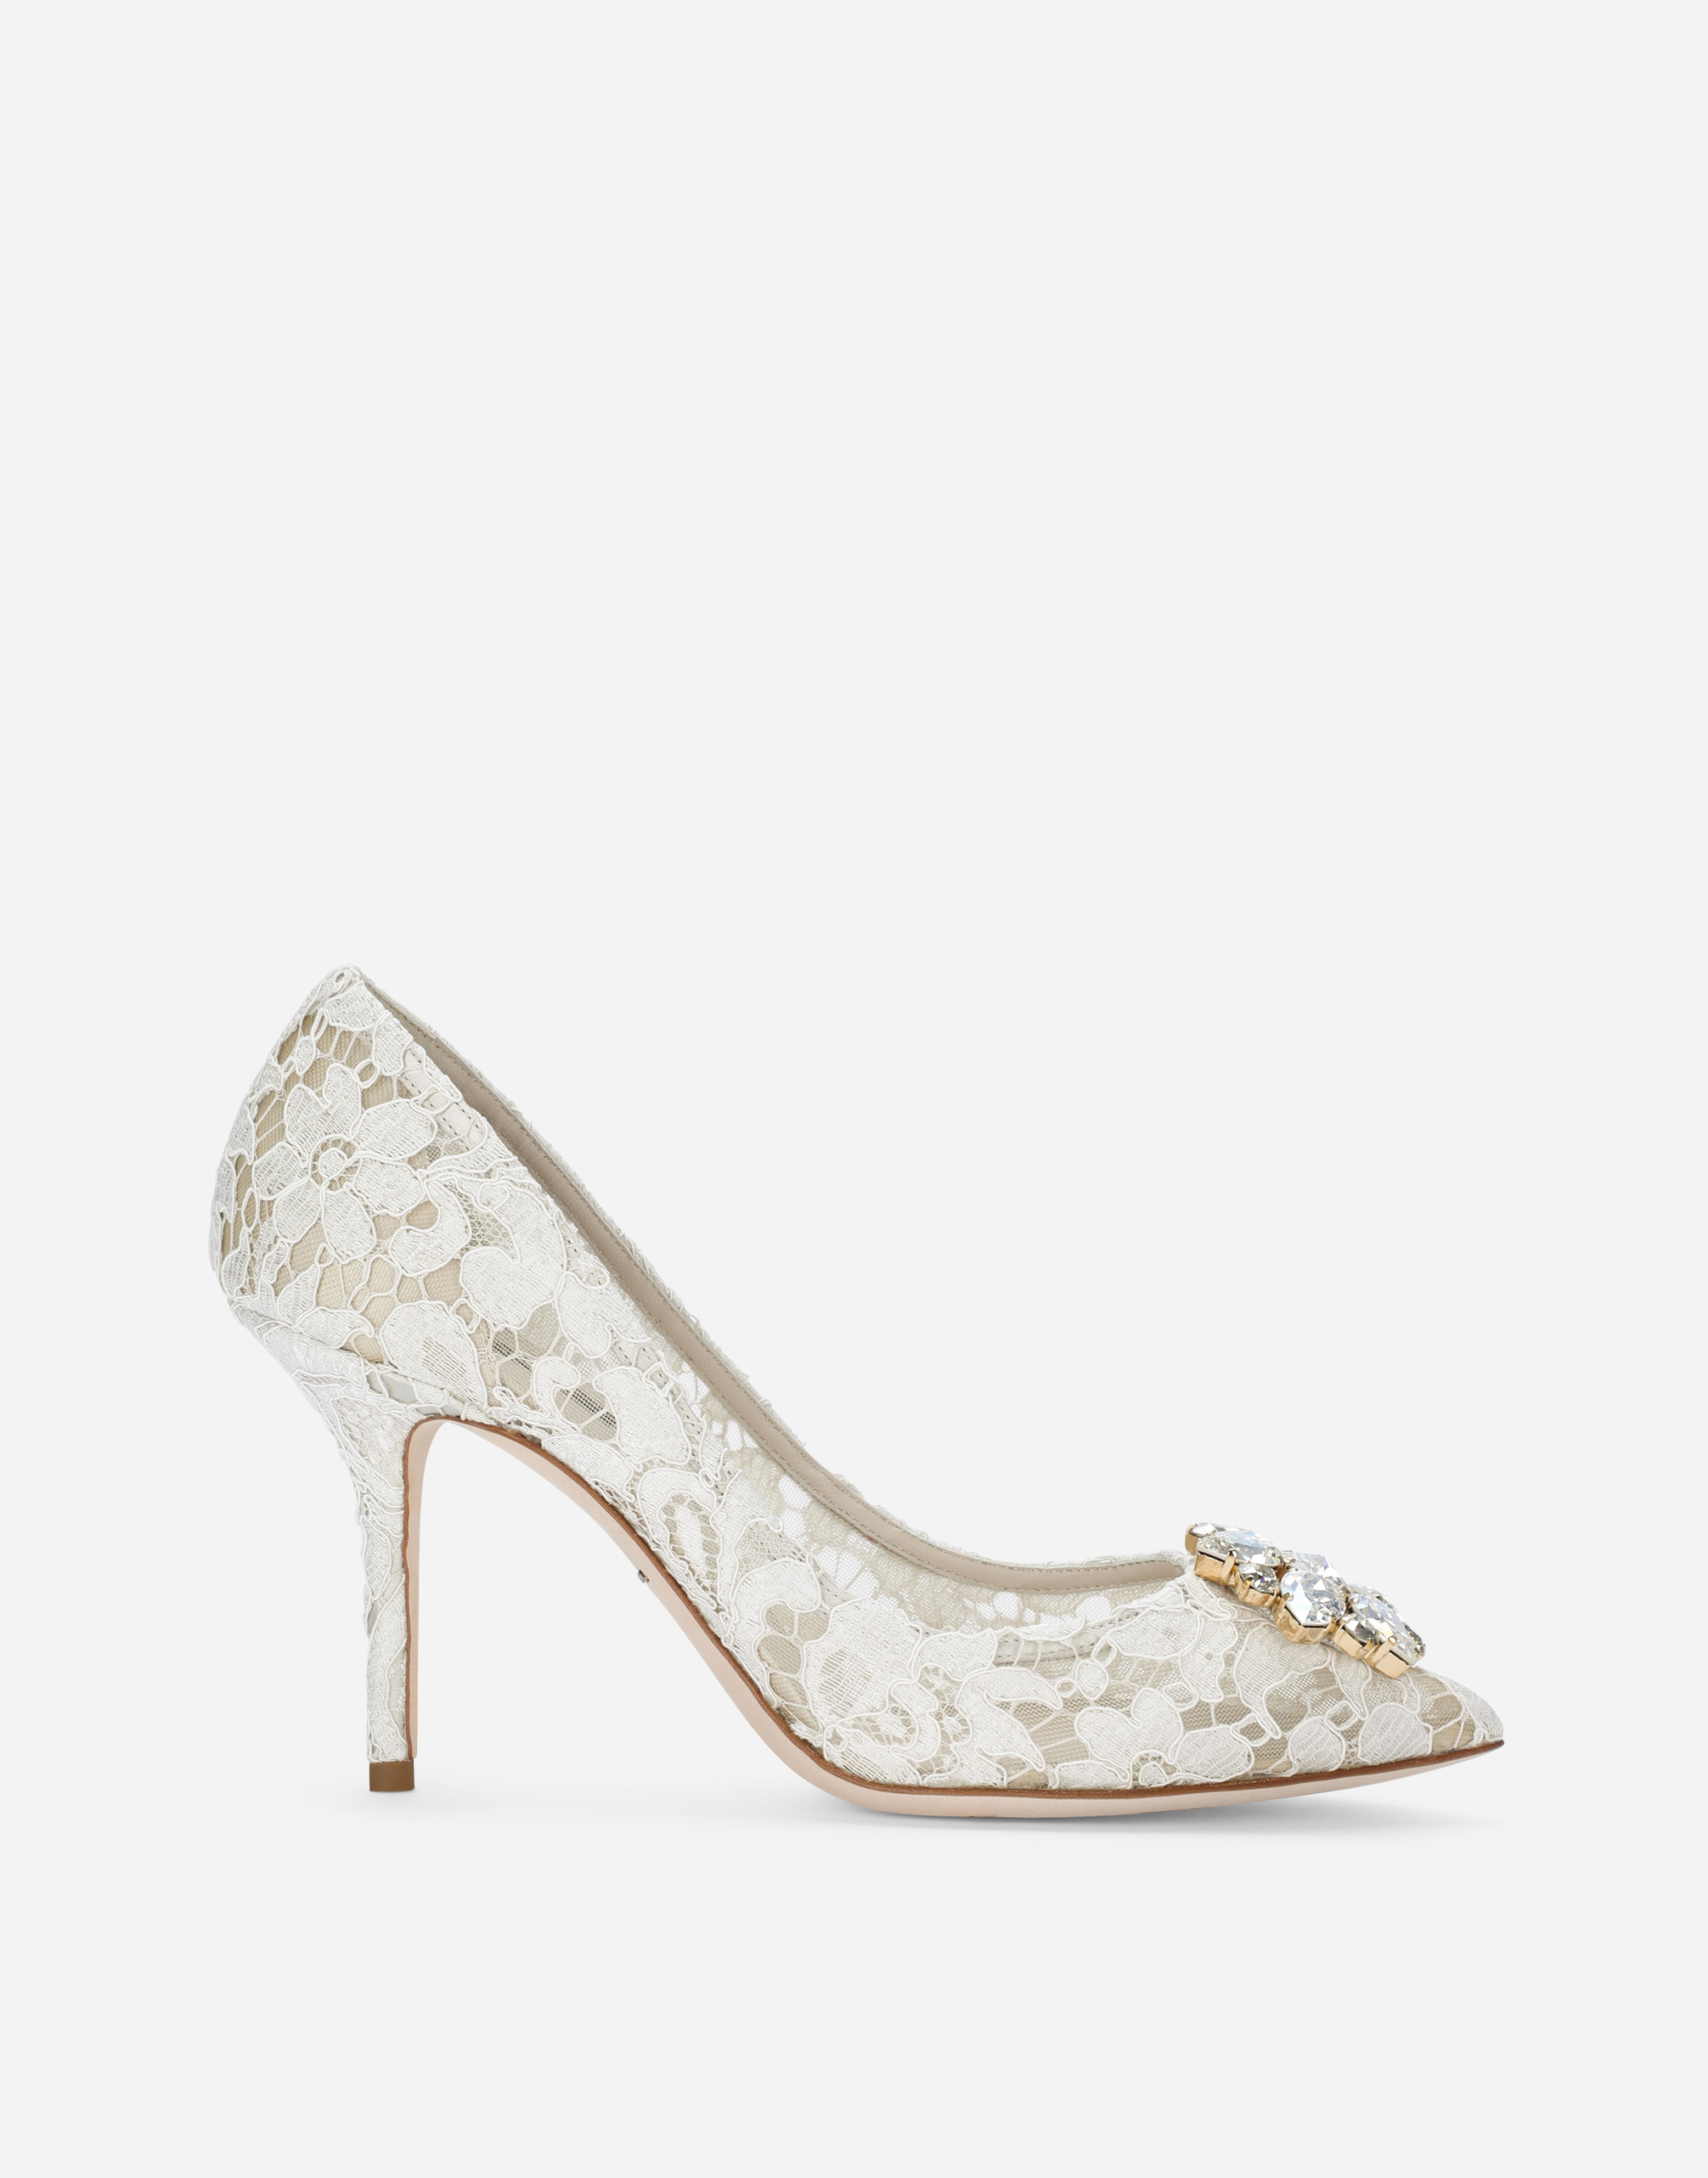 Lace rainbow pumps with brooch detailing in White